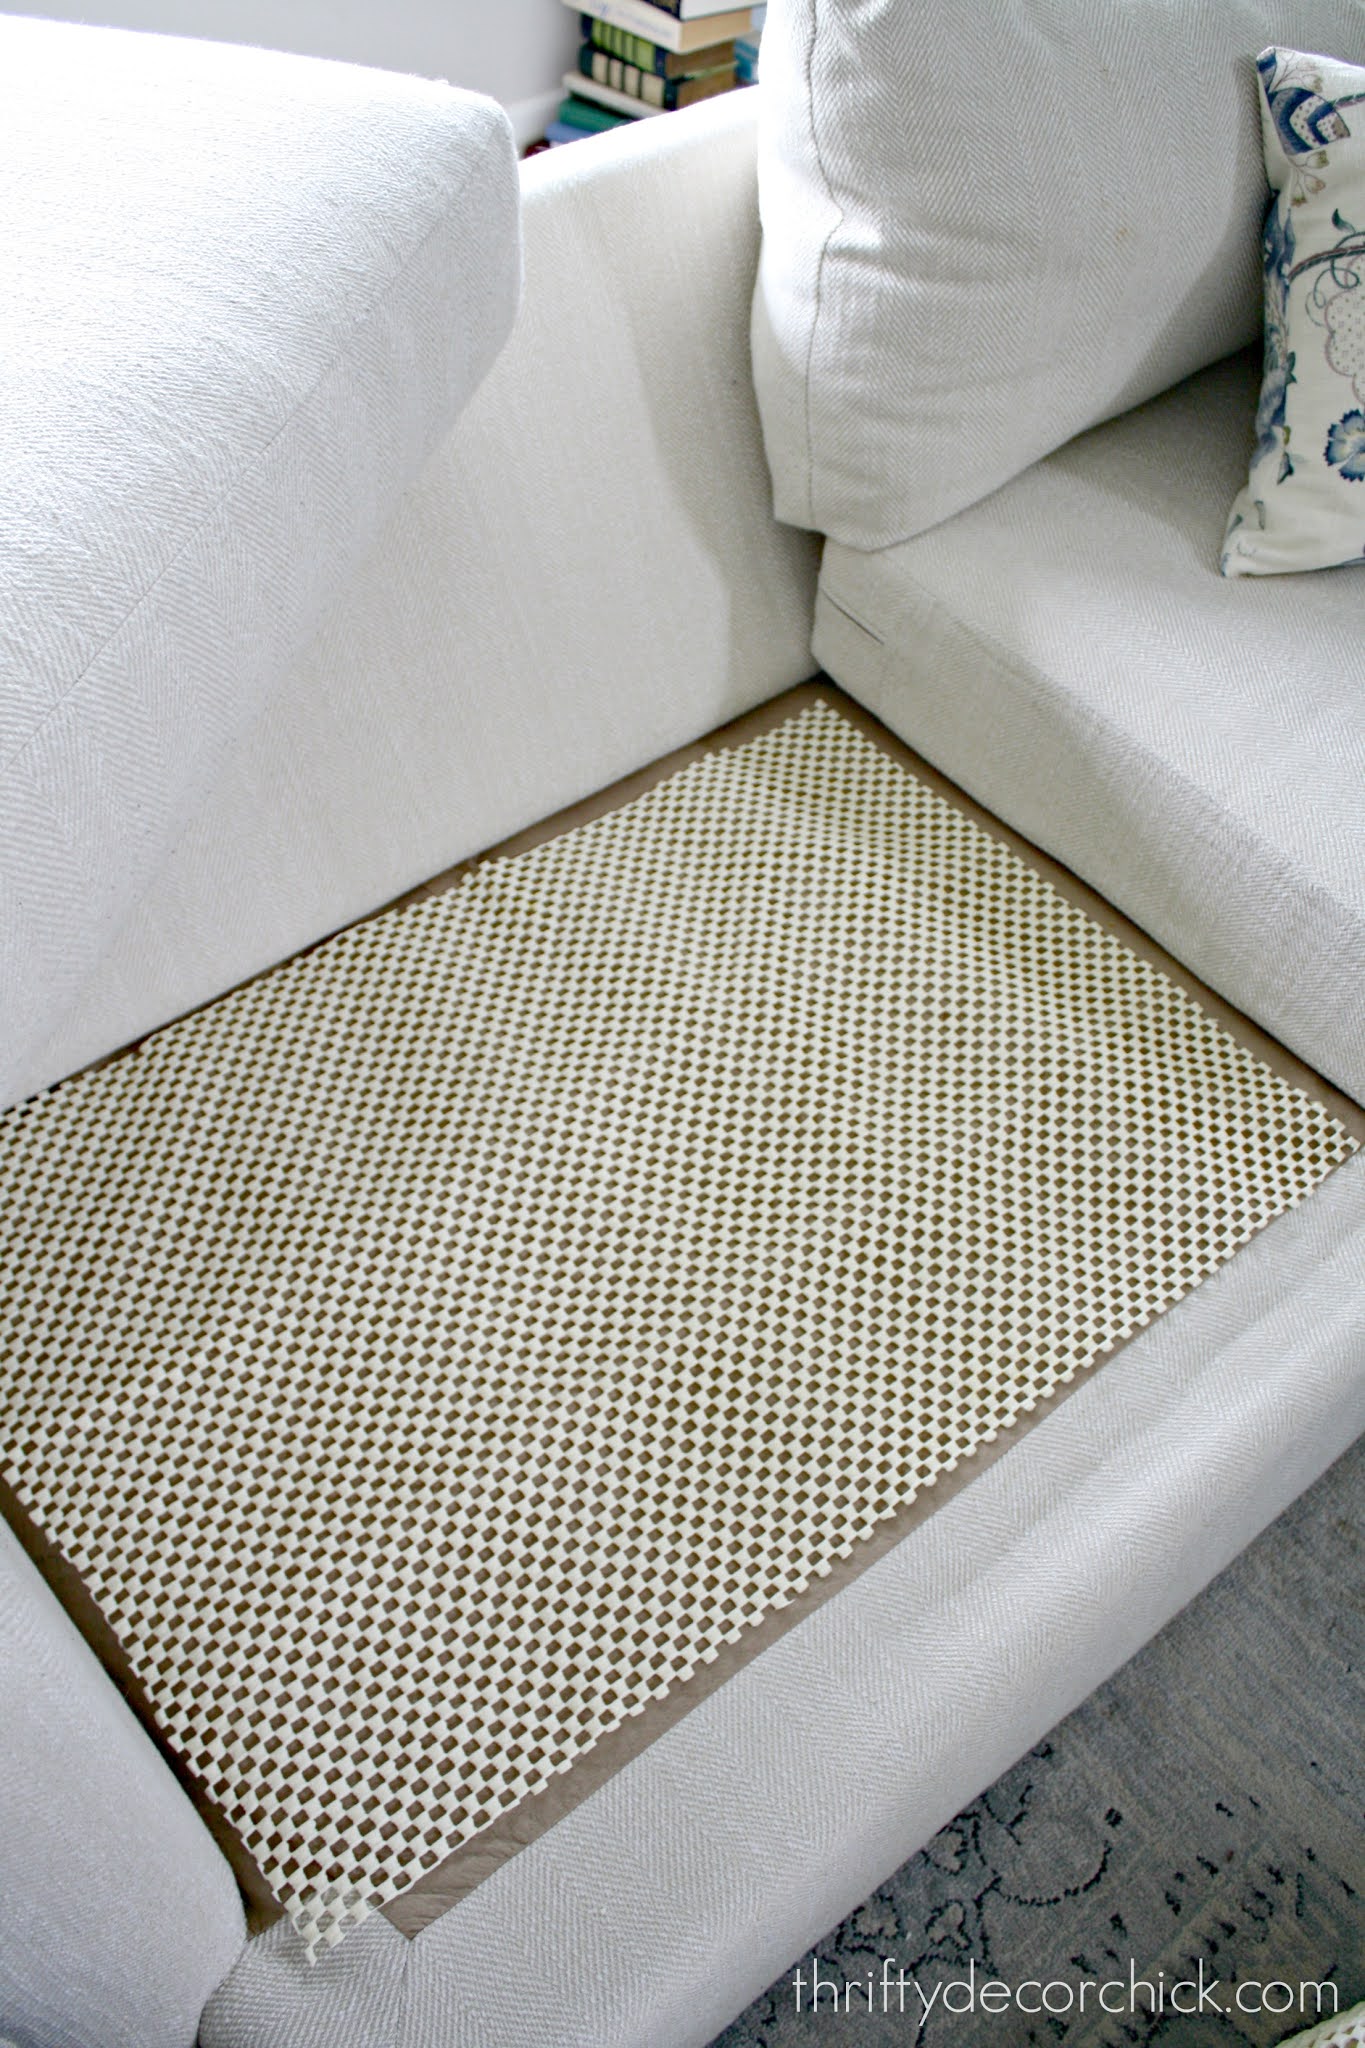 How To Fix Flat Couch Cushions - The Honeycomb Home